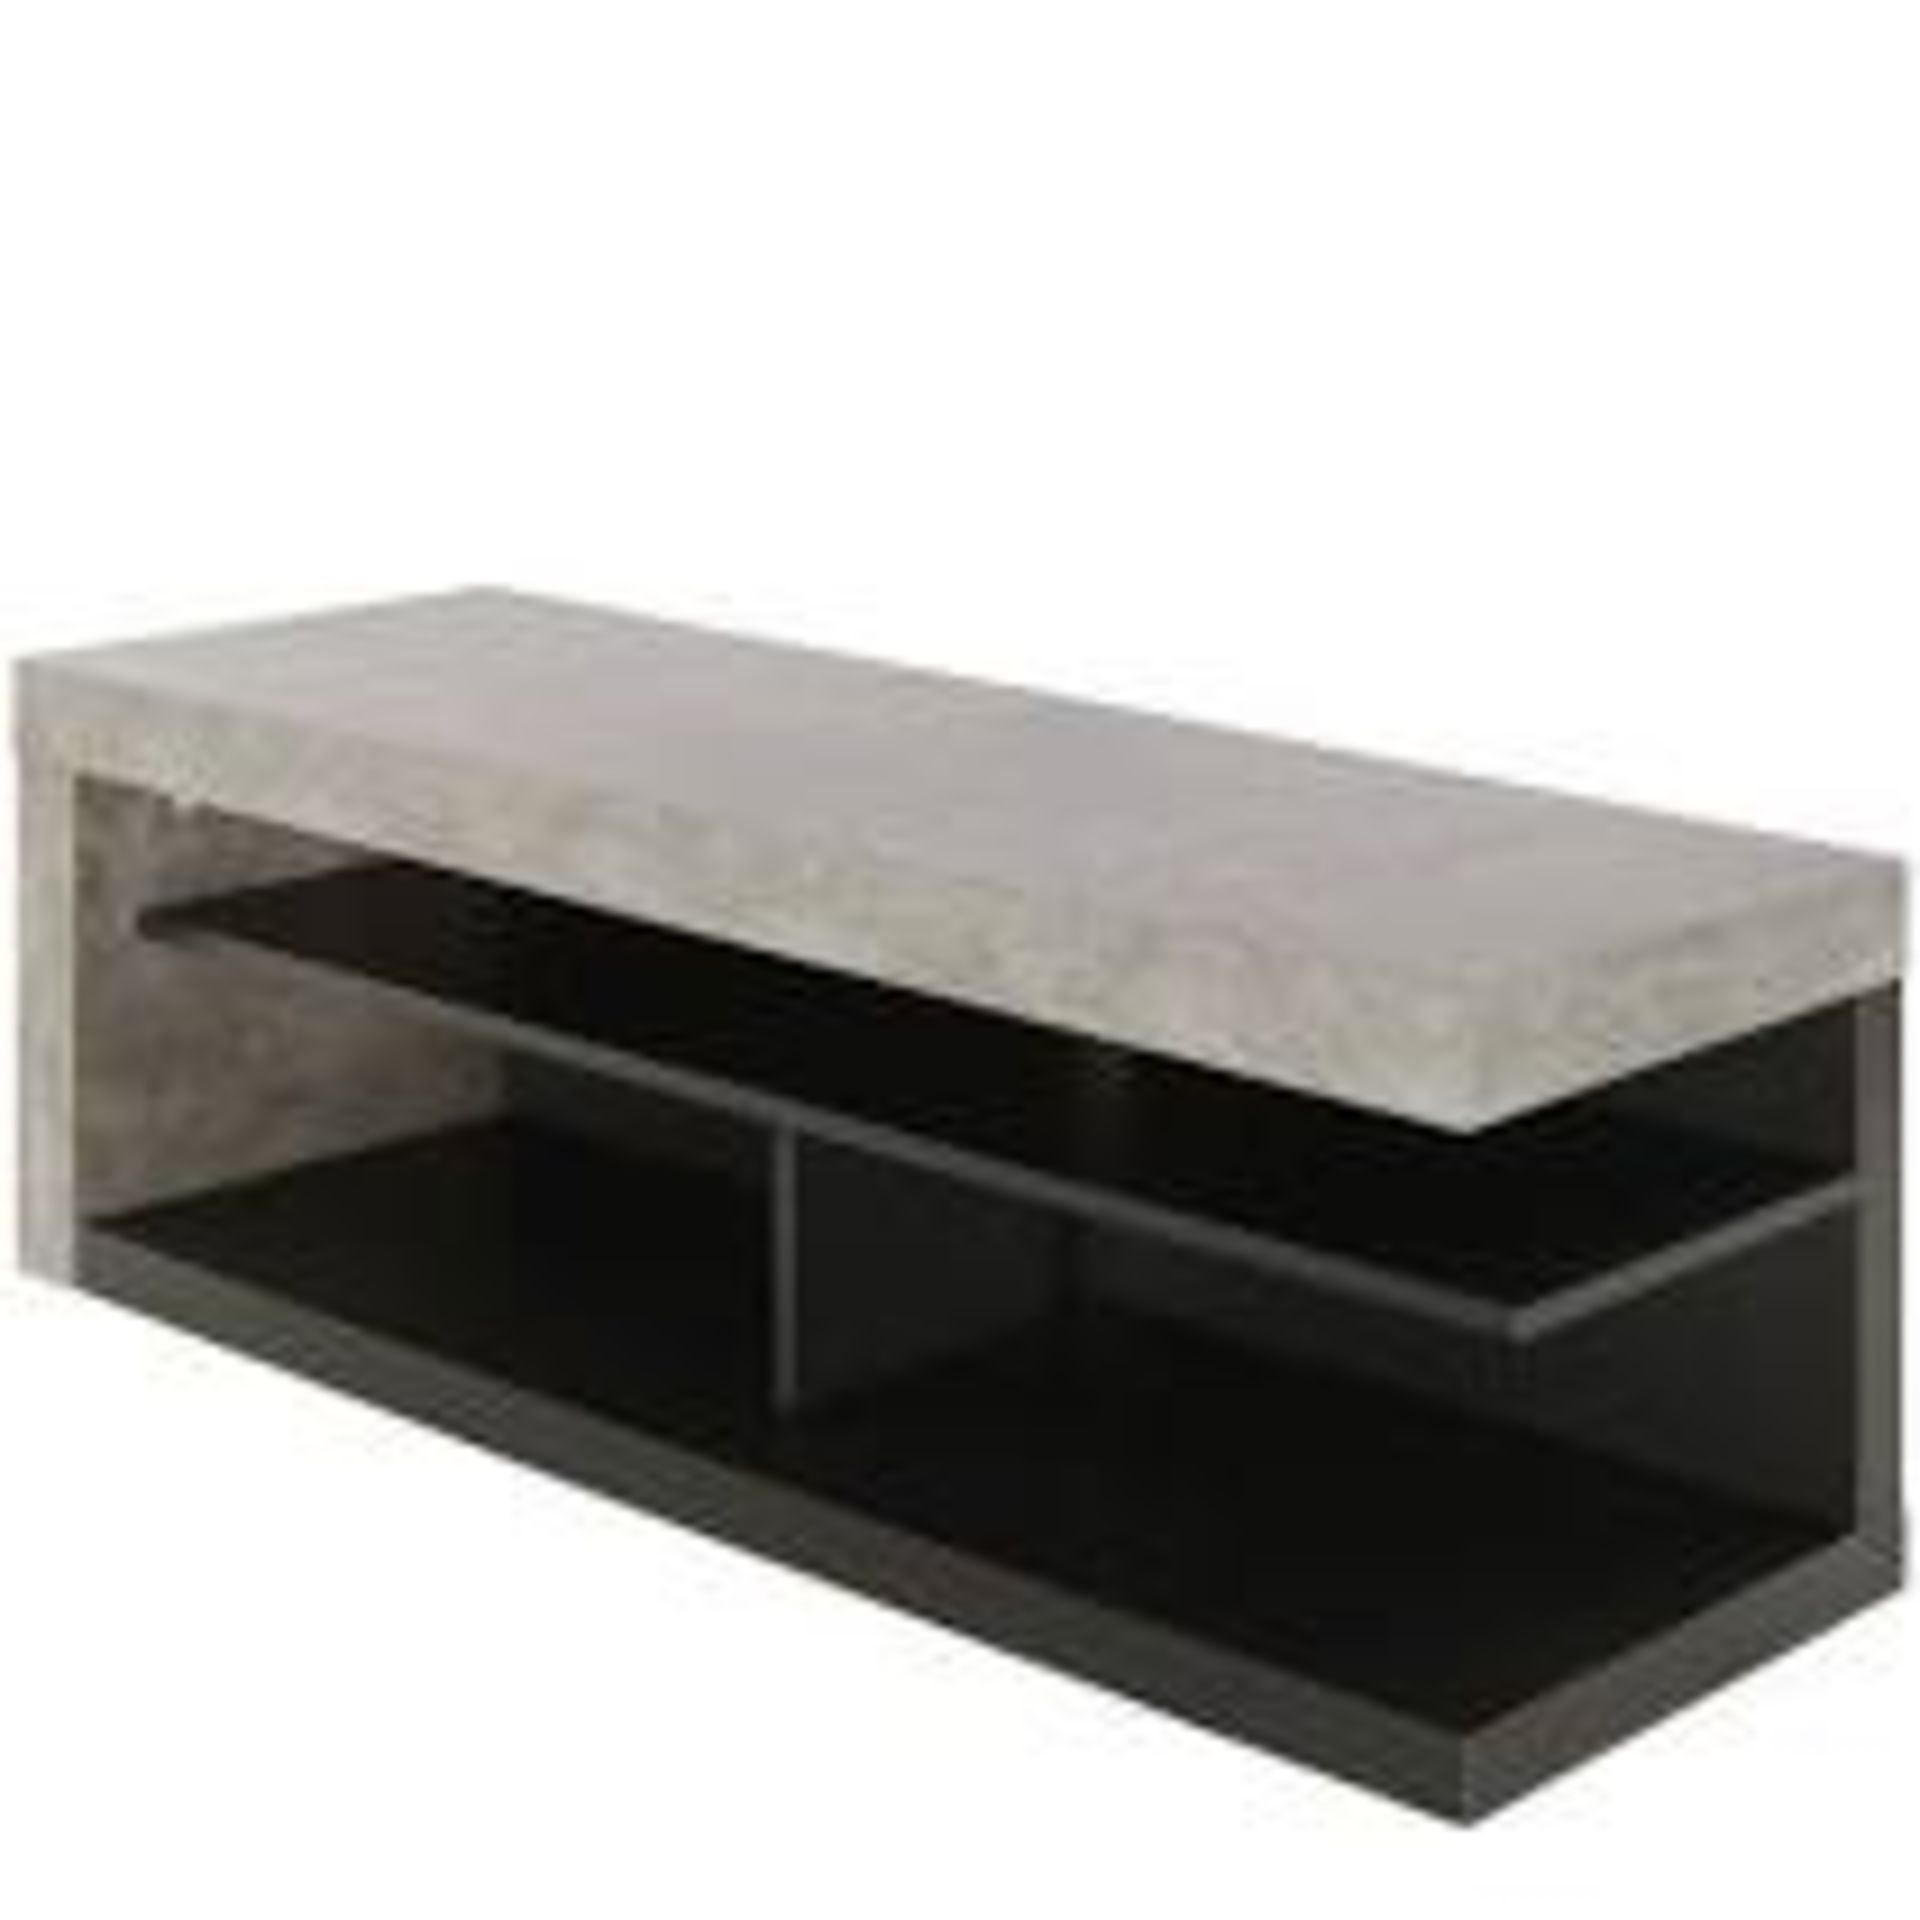 Boxed Everly TV Stand RRP £260 (19079) (Pictures Are For Illustration Purposes Only) (Appraisals Are